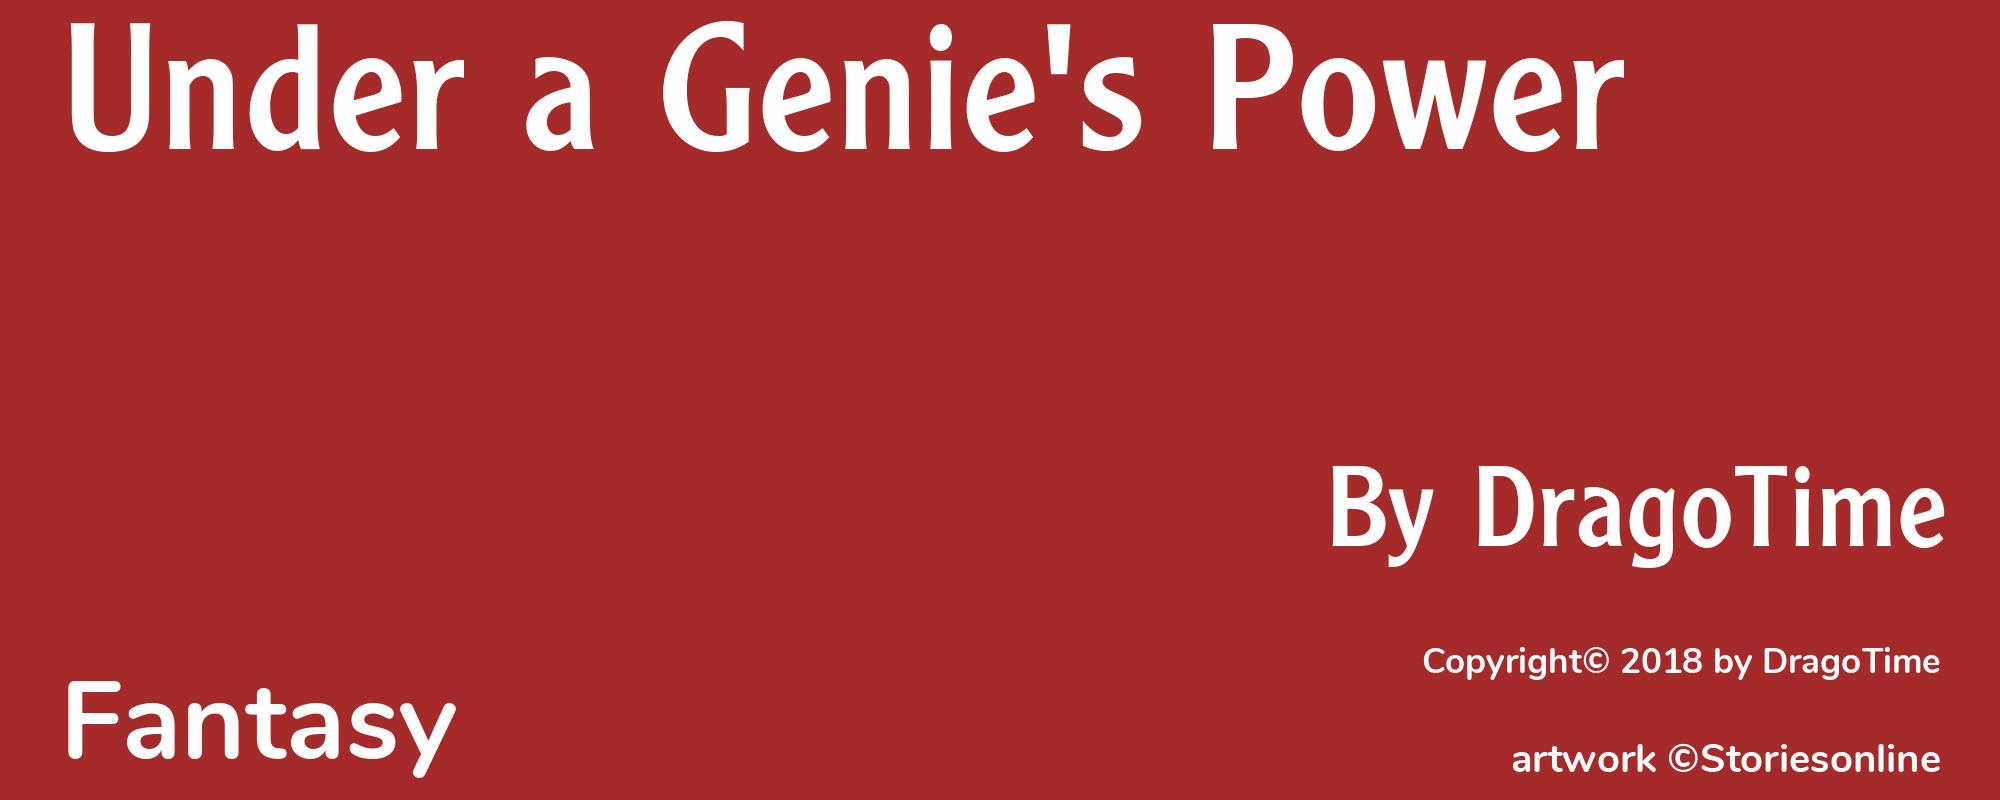 Under a Genie's Power - Cover